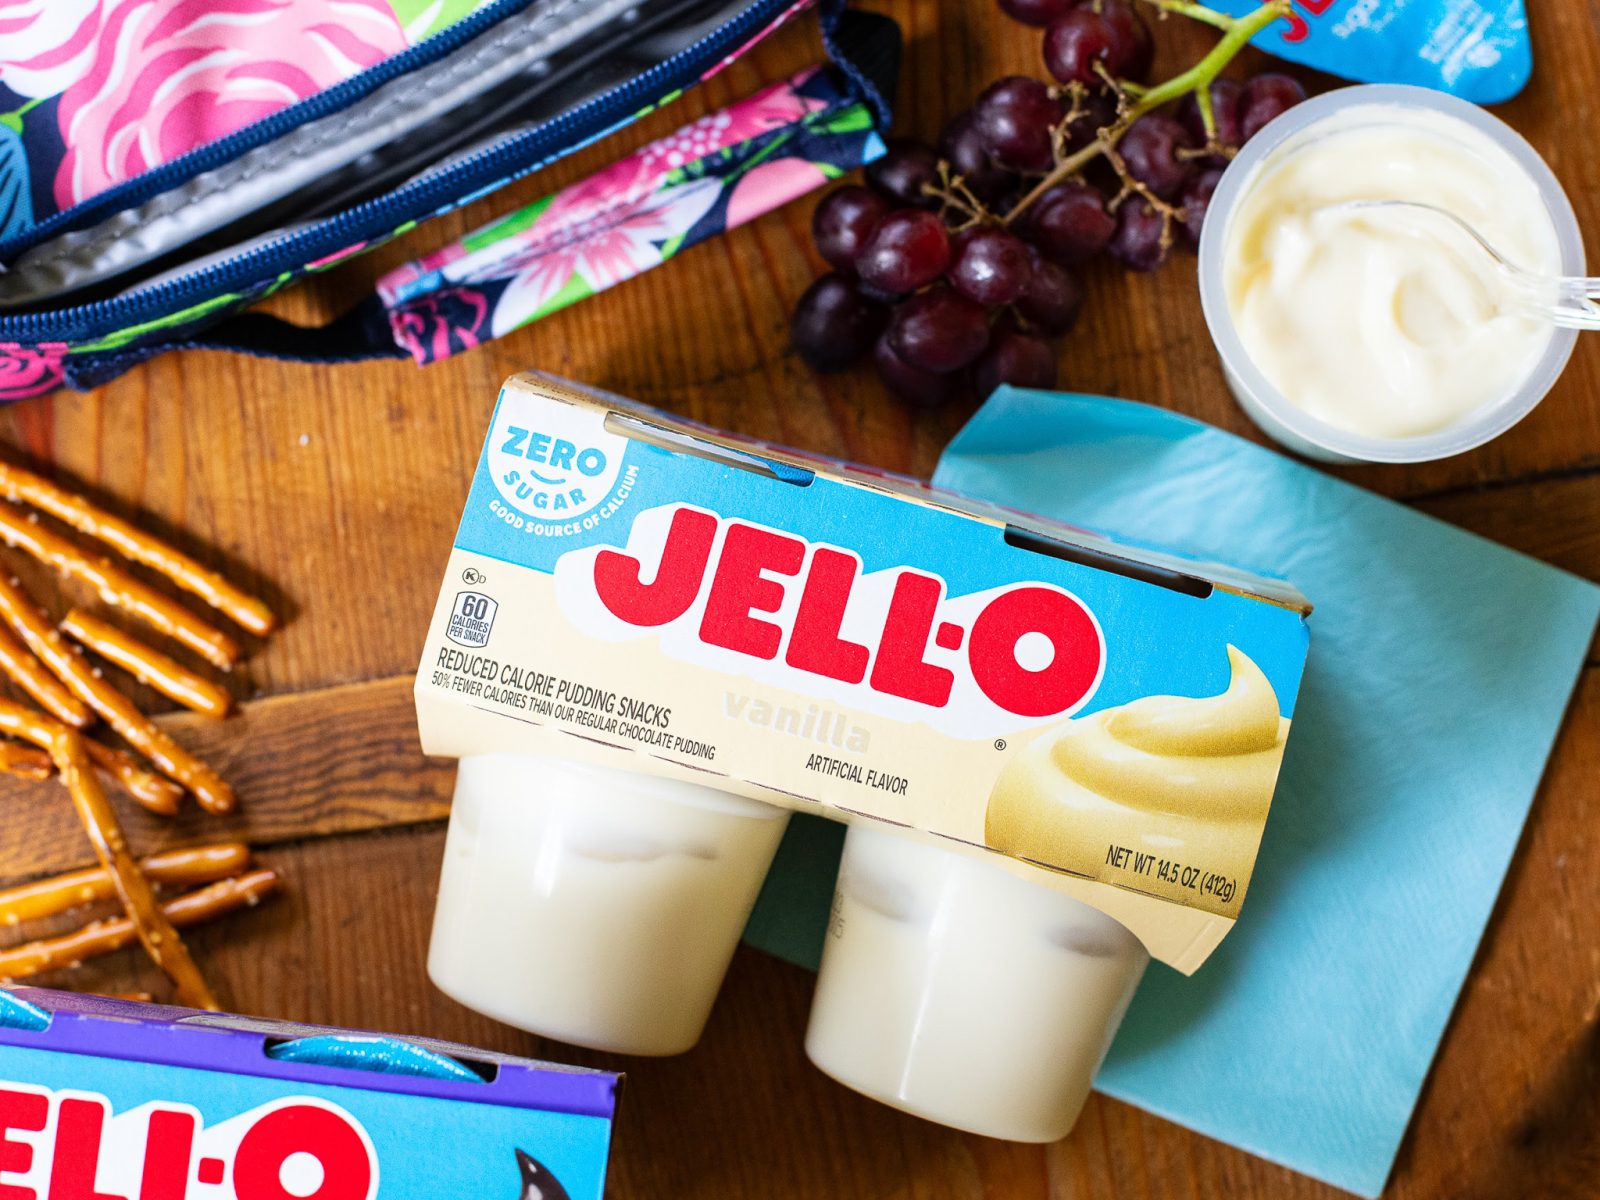 Jell-O Gelatin Or Pudding 4-Packs Just $1.49 At Kroger